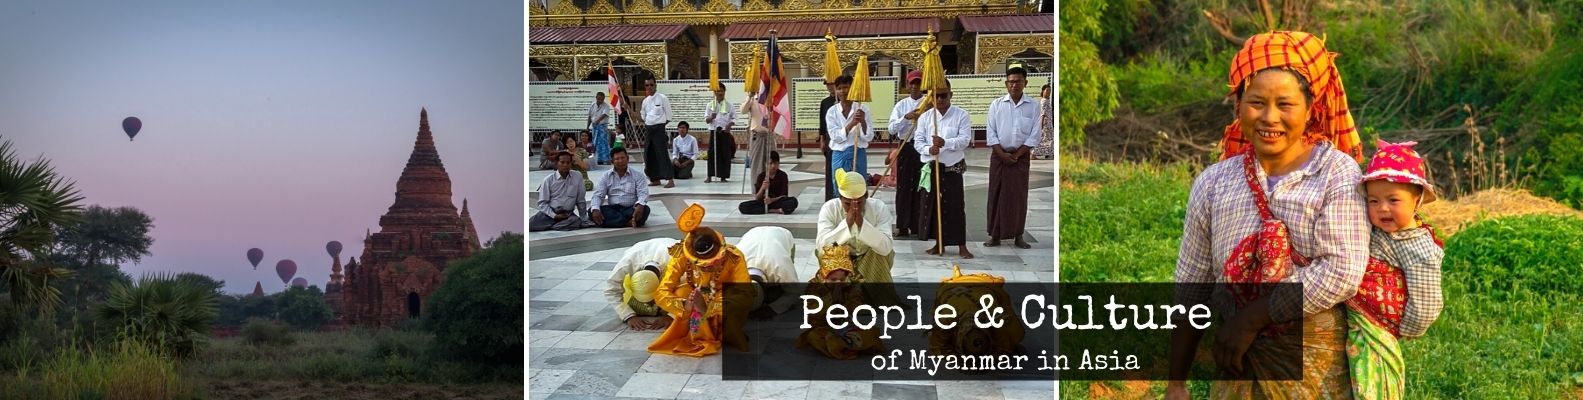 People and Culture of Myanmar